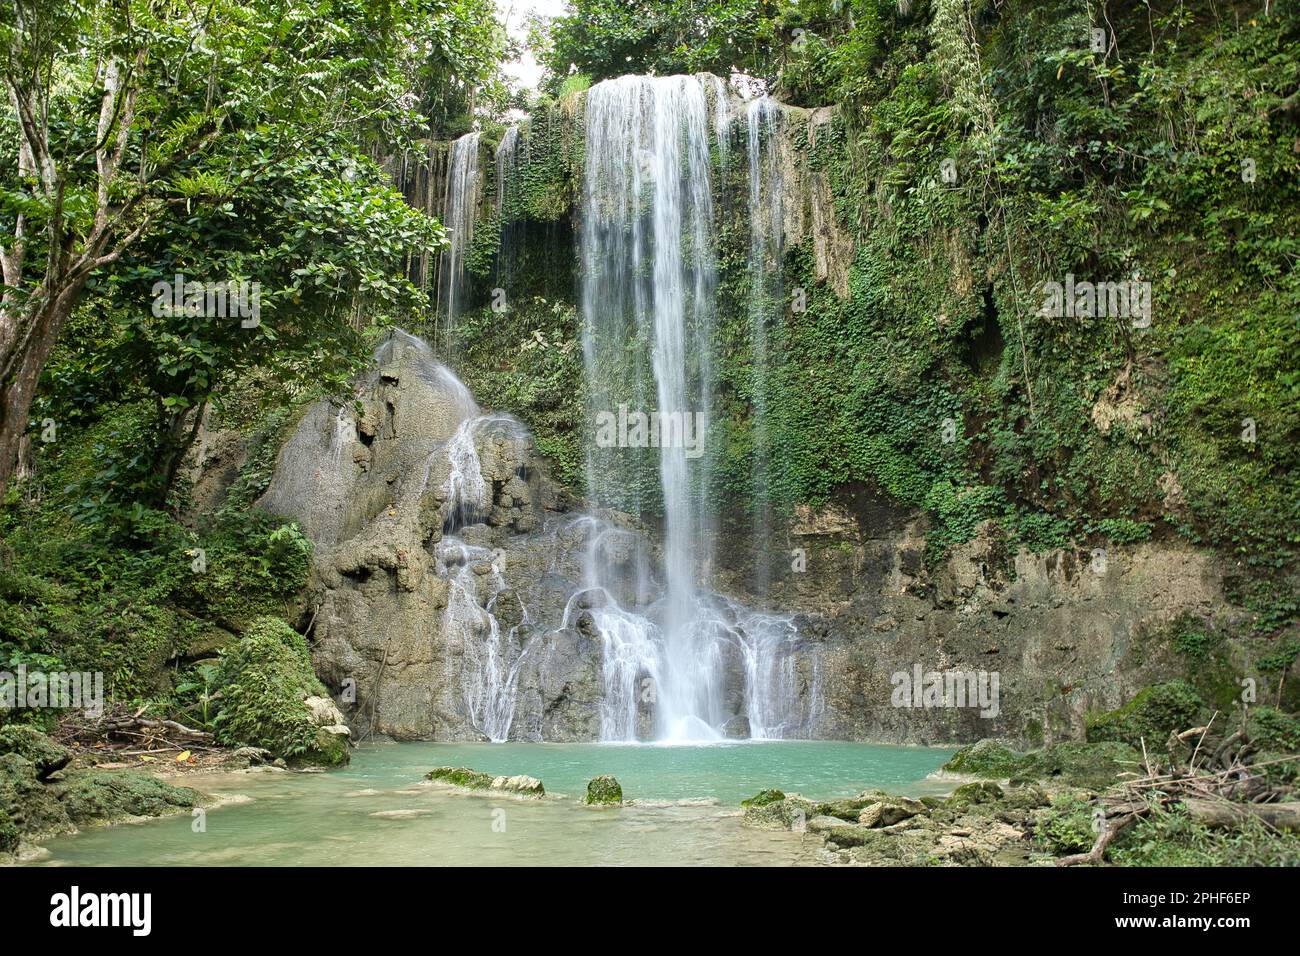 The idyllic Kawasan Waterfall in Siquijor in the Philippines that flow into a natural pool of water surrounded by the light-lit rainforest. Stock Photo